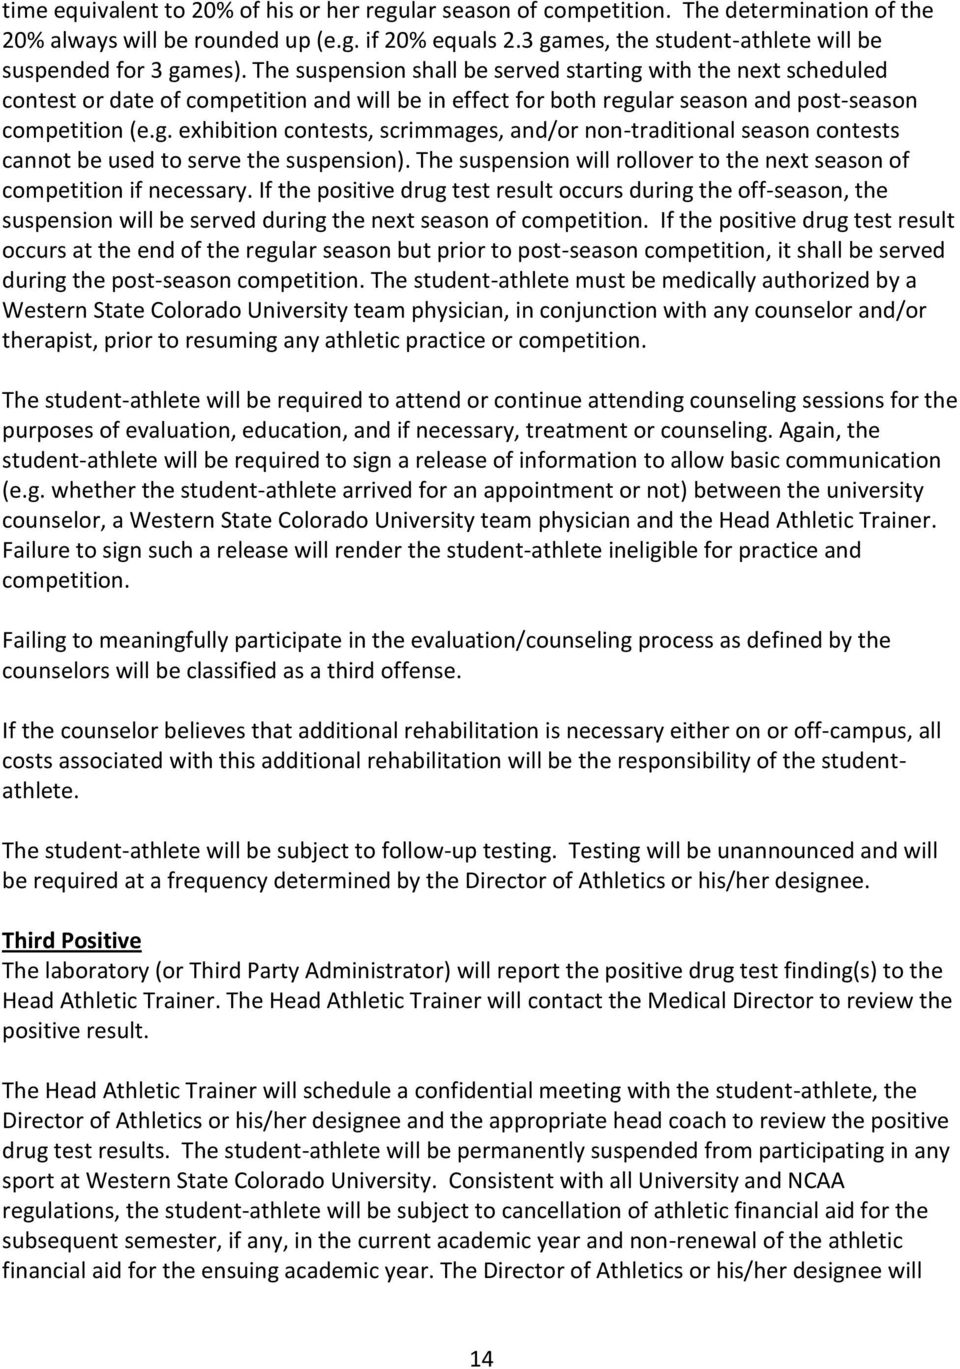 The suspension shall be served starting with the next scheduled contest or date of competition and will be in effect for both regular season and post-season competition (e.g. exhibition contests, scrimmages, and/or non-traditional season contests cannot be used to serve the suspension).